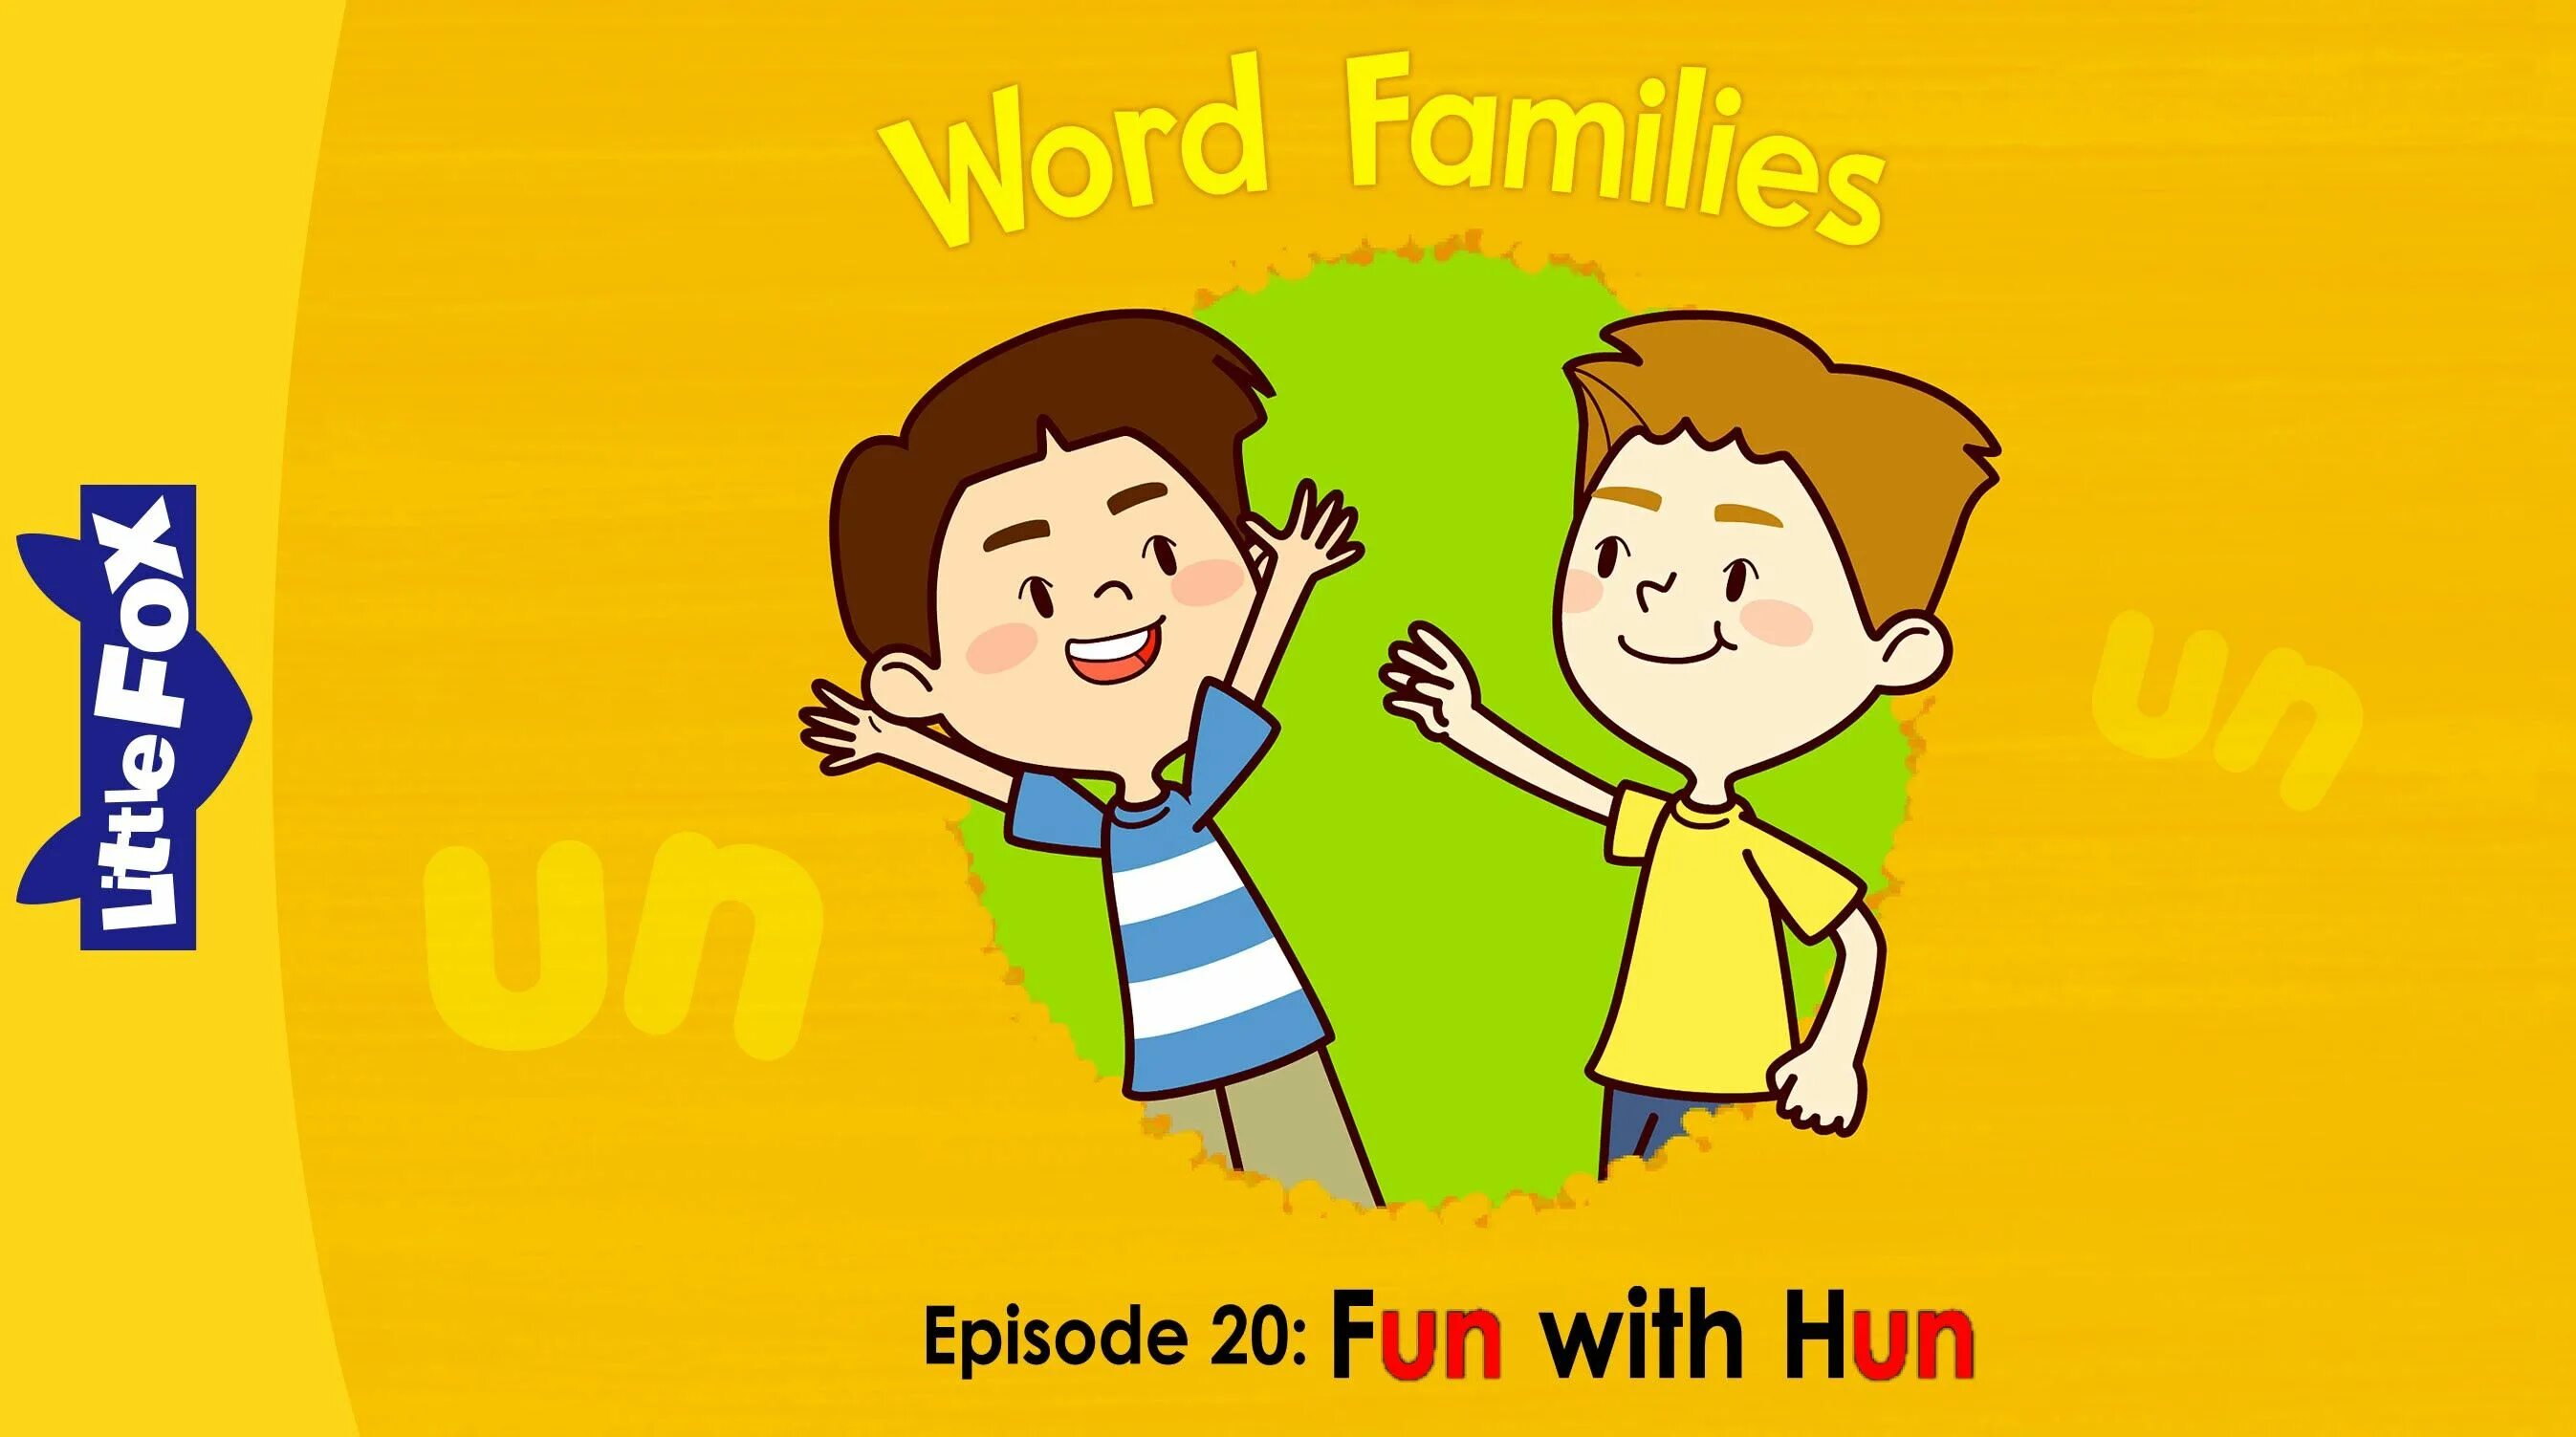 Word Families Episode 20. Fun with Words. Little Fox Word Families og. Little Fox Word Families 8. Fun 20